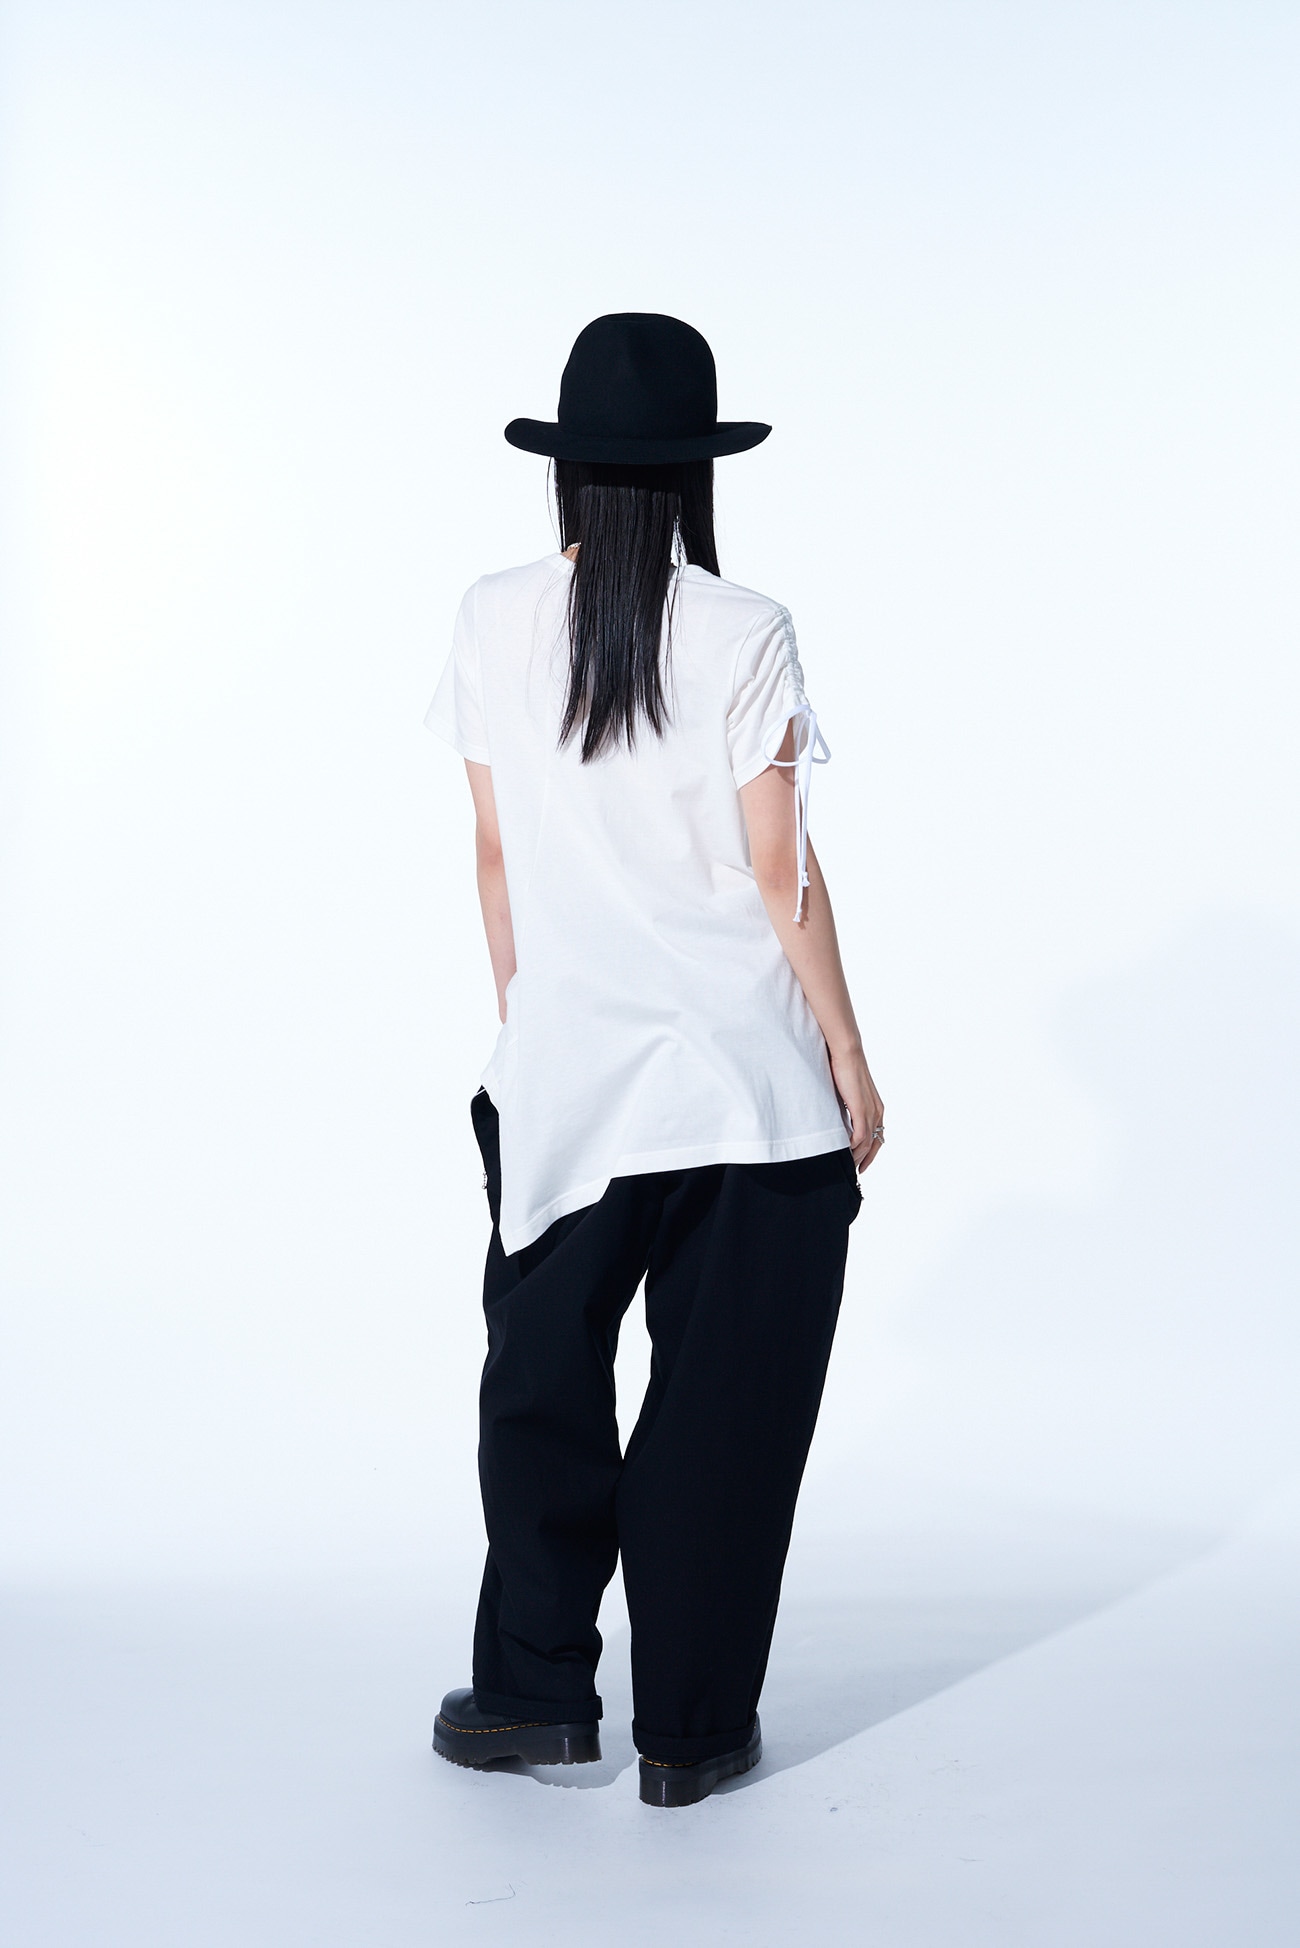 COTTON TWILL DRAWSTRING WIDE PANTS WITH ZIP SIDE POCKET